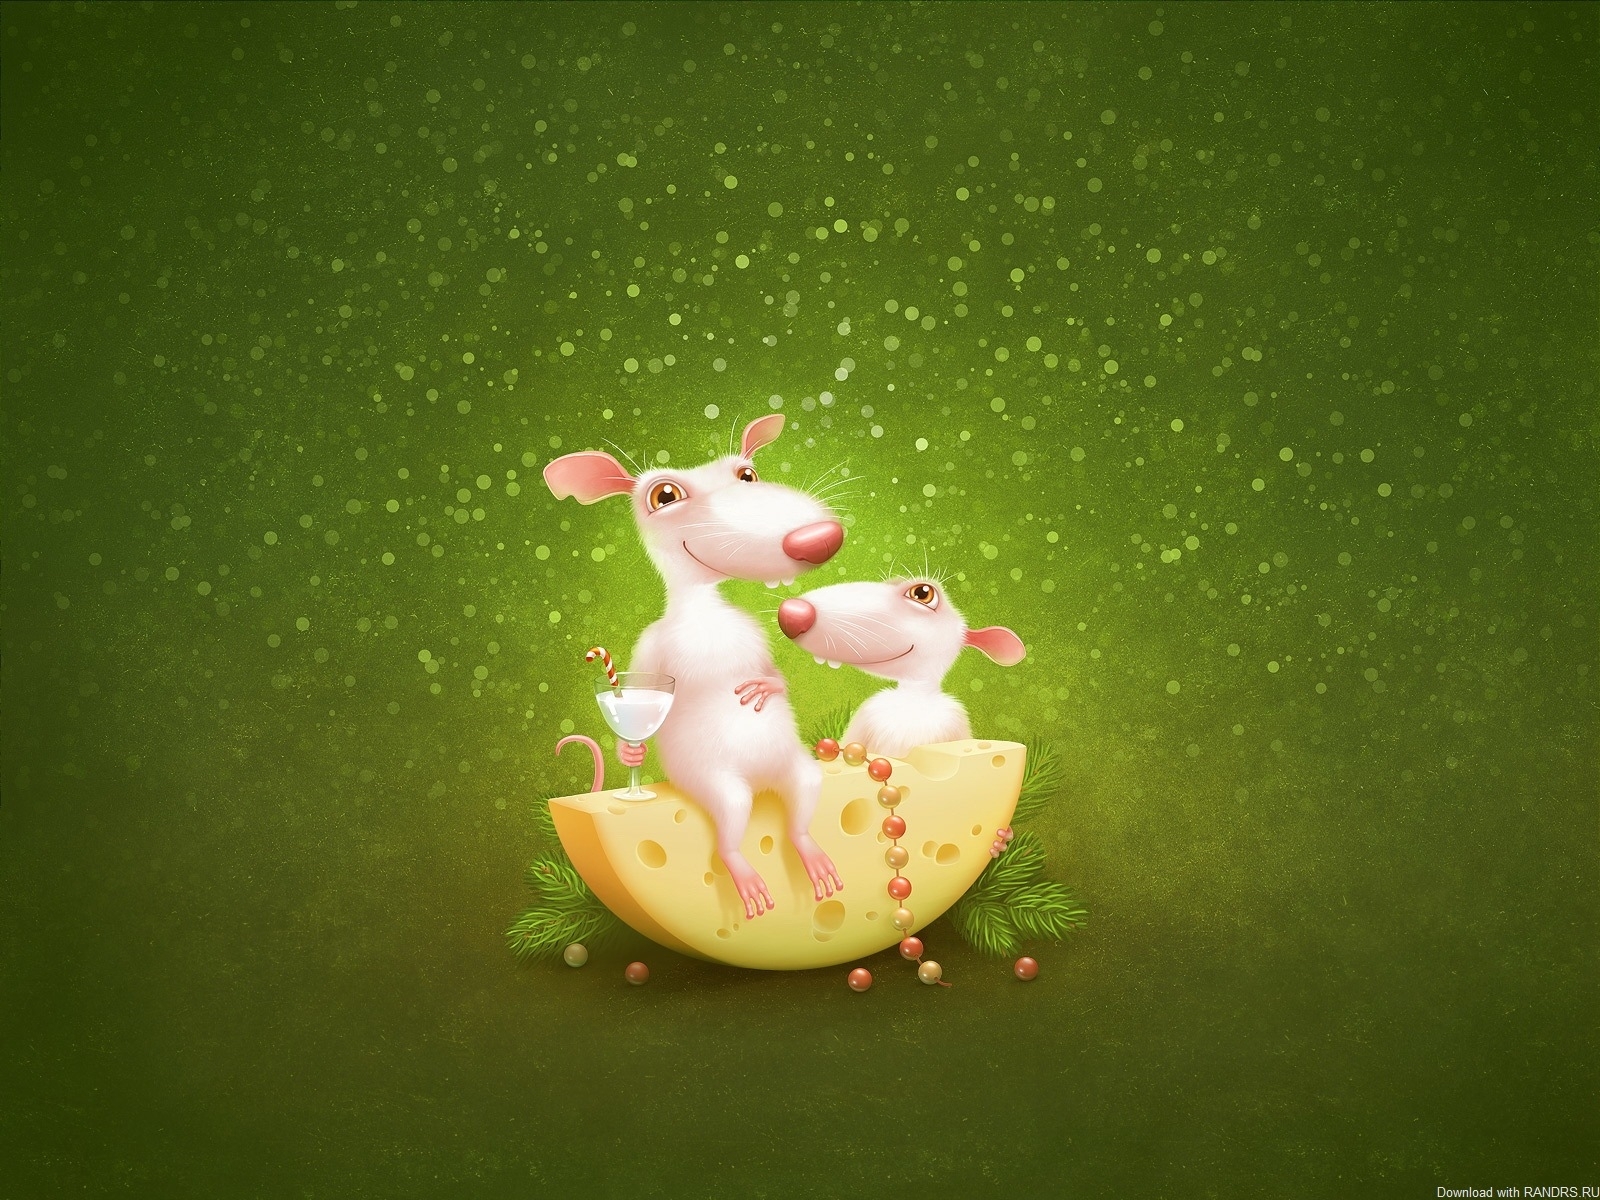 mice, pictures, green High Definition image